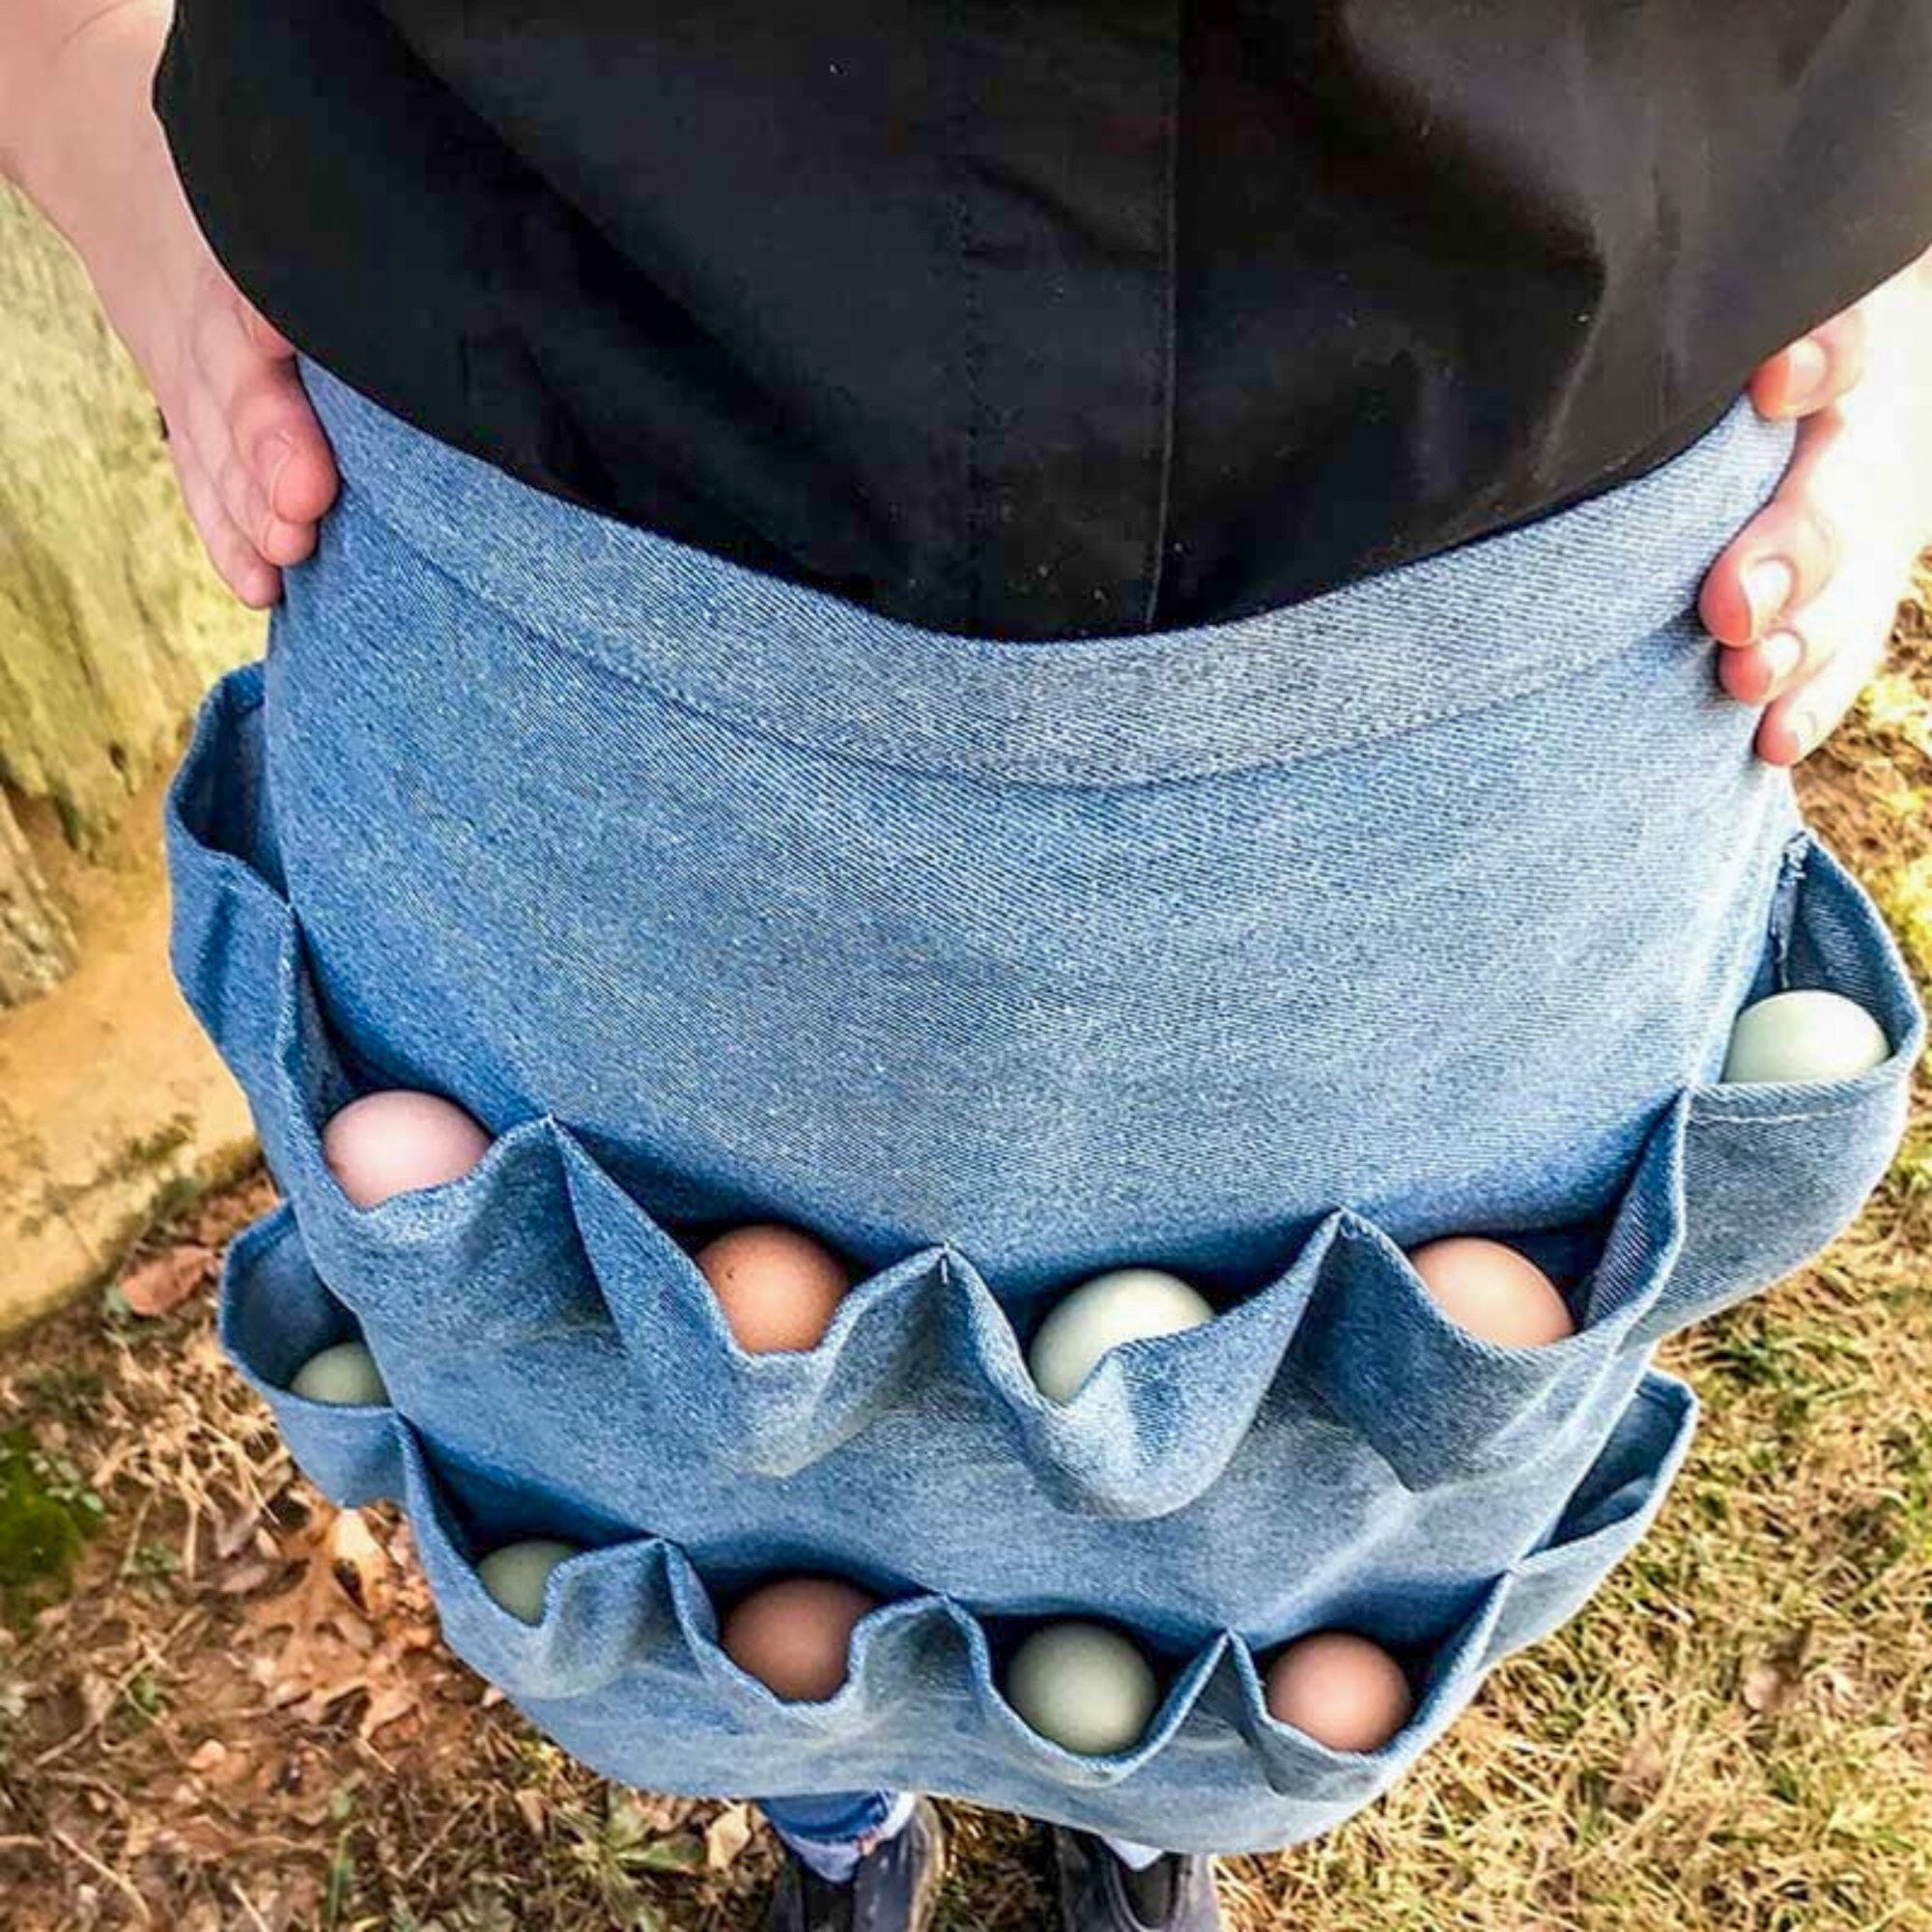 Backyard Barnyard 12 Pocket Soft Durable Denim Egg Gathering Apron FREE  RUSTIC GIFT BAG INCLUDED! Collecting Chicken Duck Quail Poultry Eggs